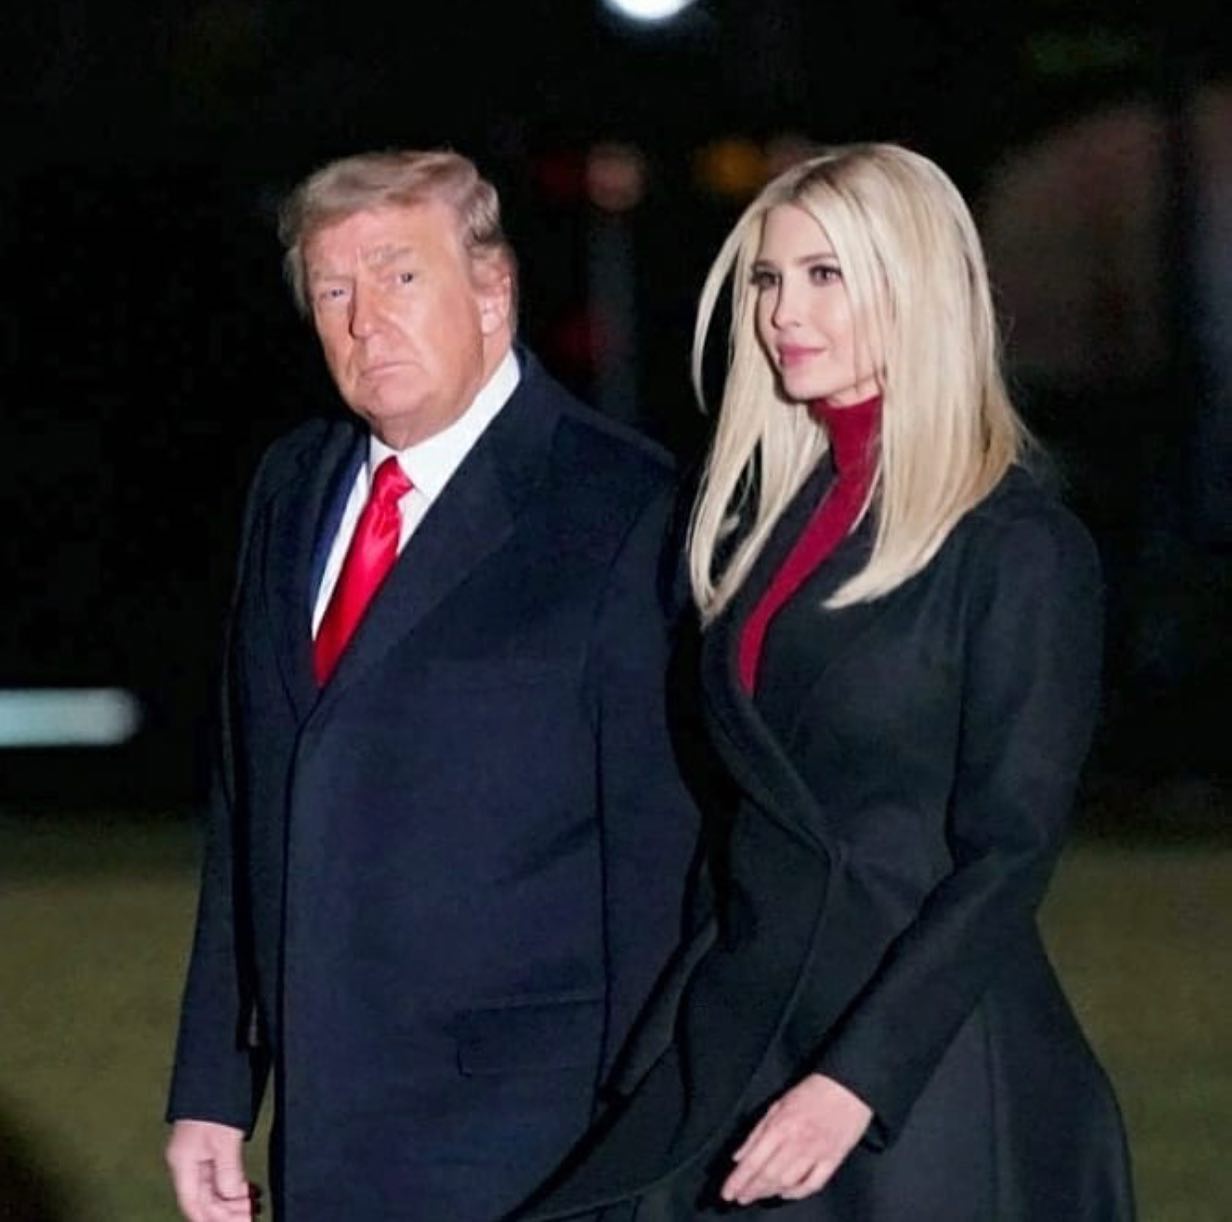 Donald Trump's daughter at the age of 41 is still admiring her charm, the more she gives birth, the more beautiful she is - 2